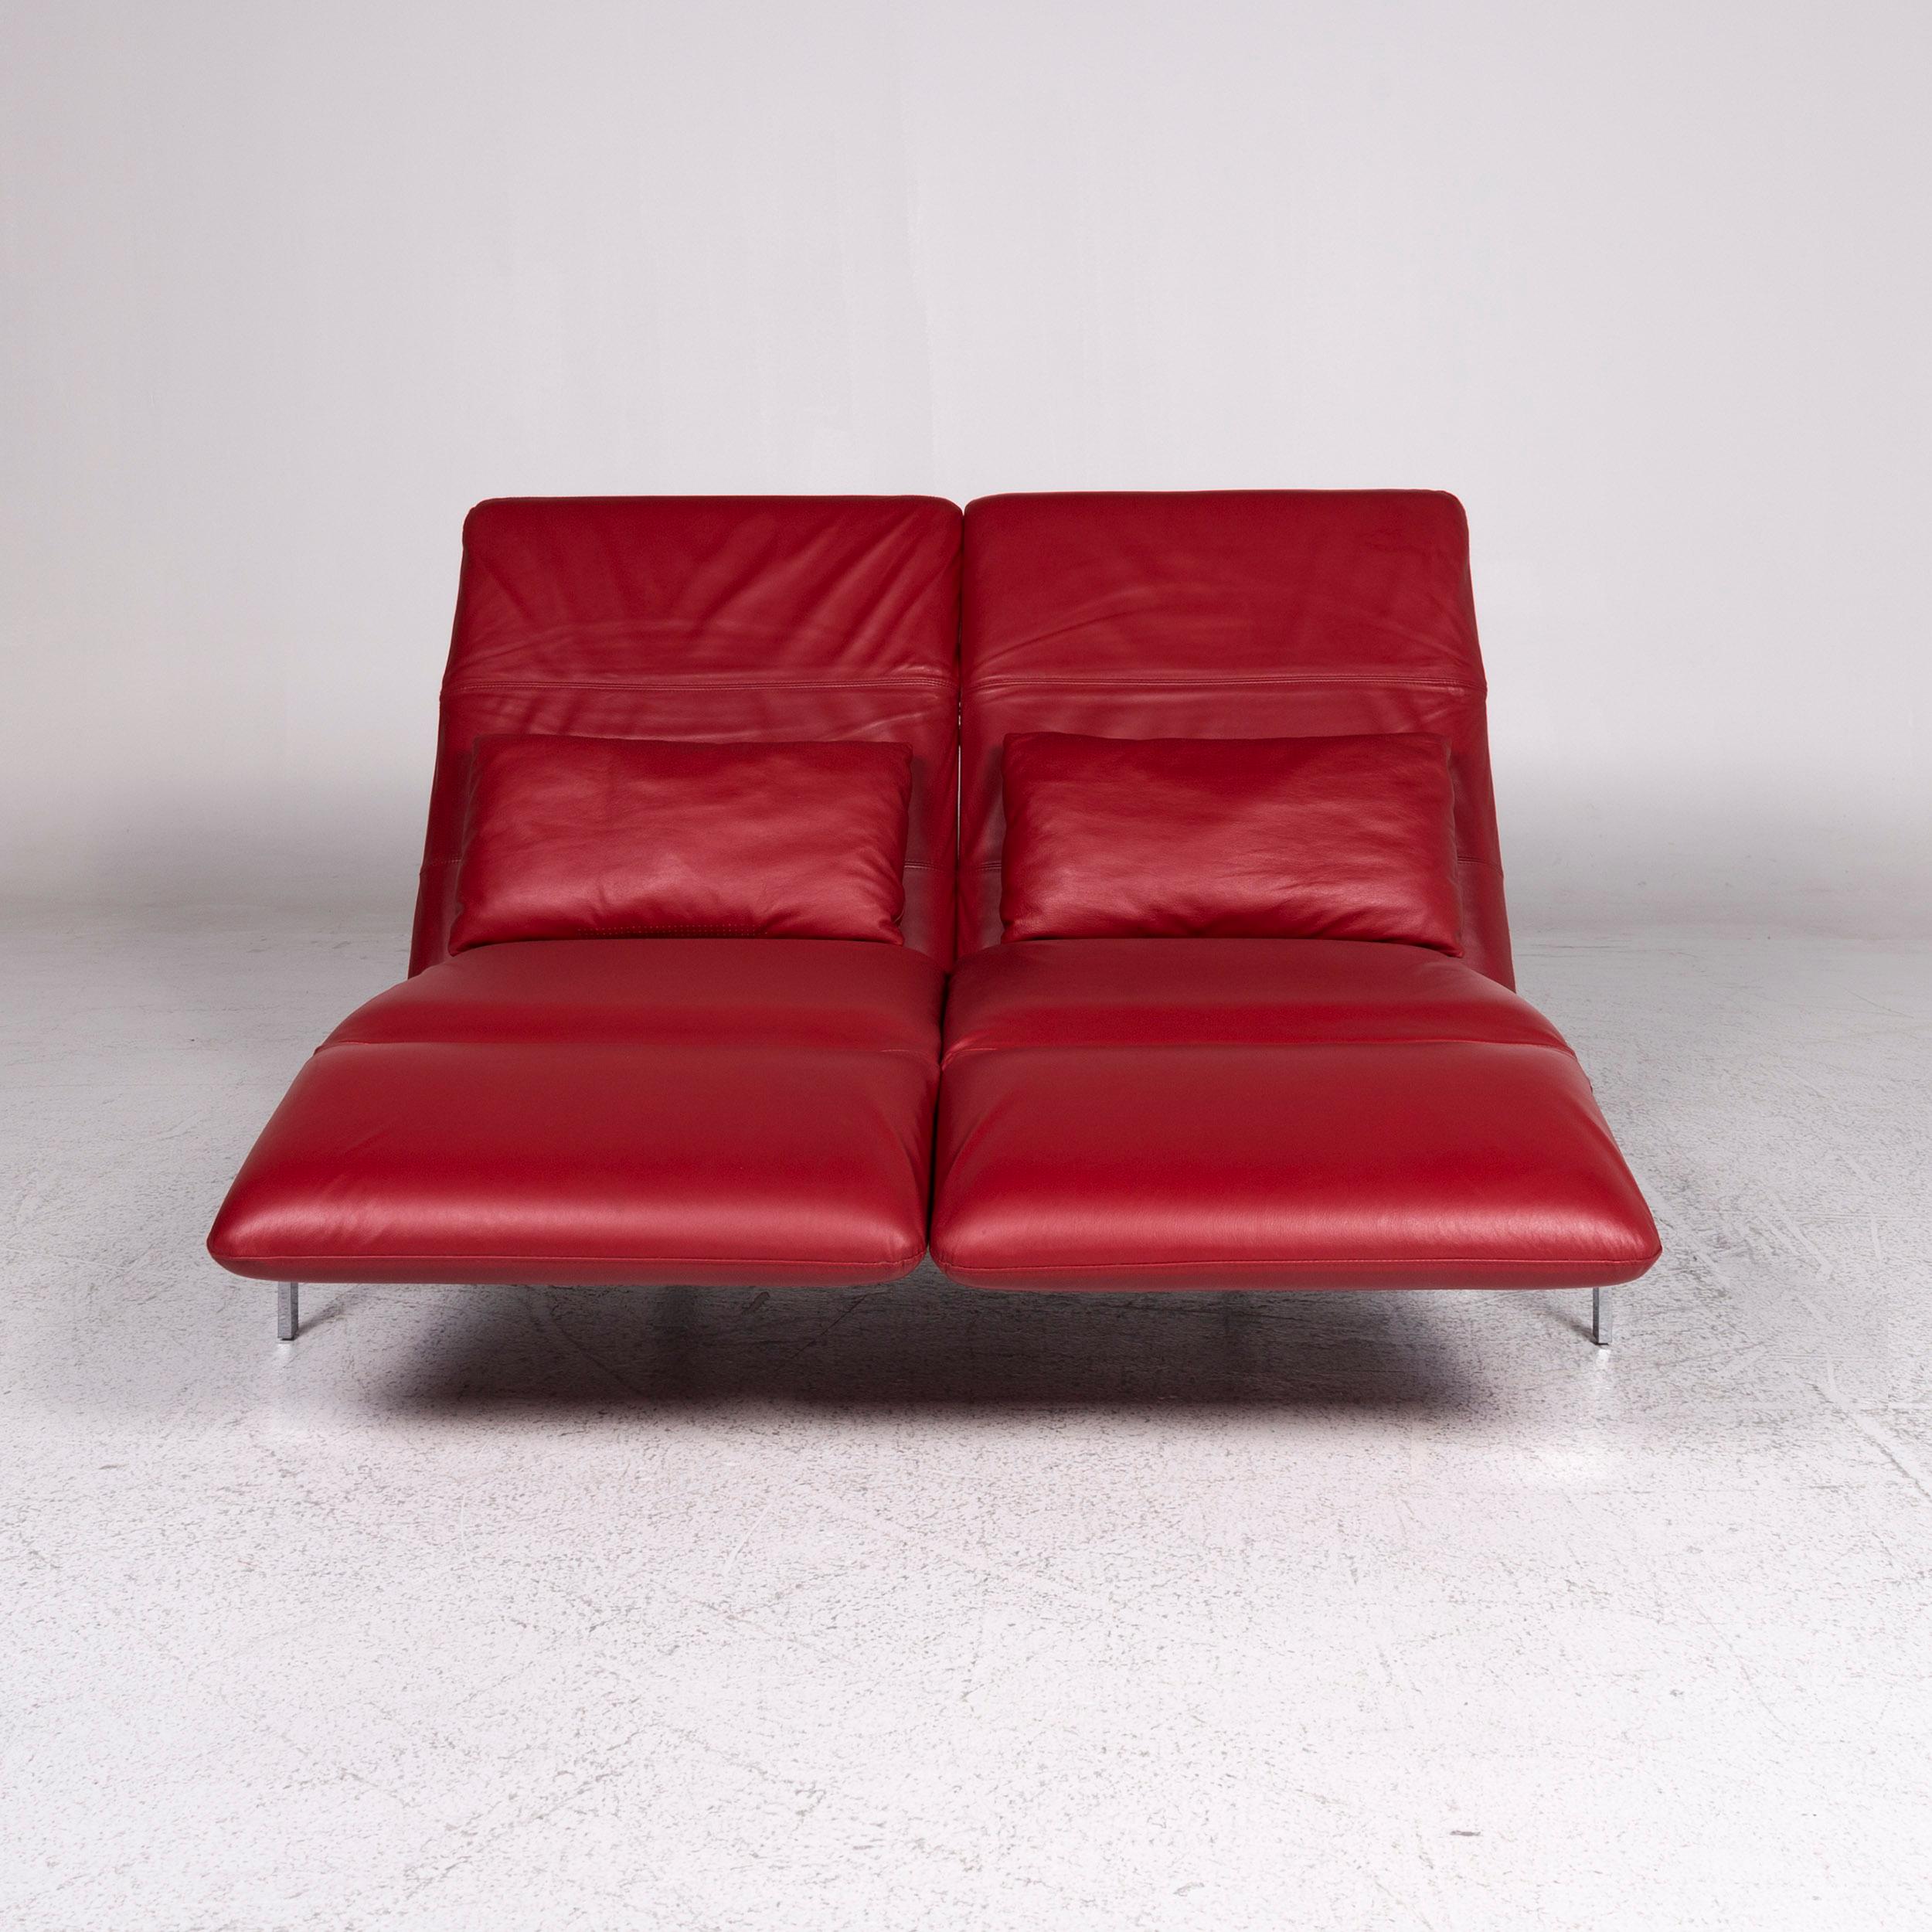 German Brühl & Sippold Roro Designer Leather Sofa Red Two-Seat Relax Function Couch